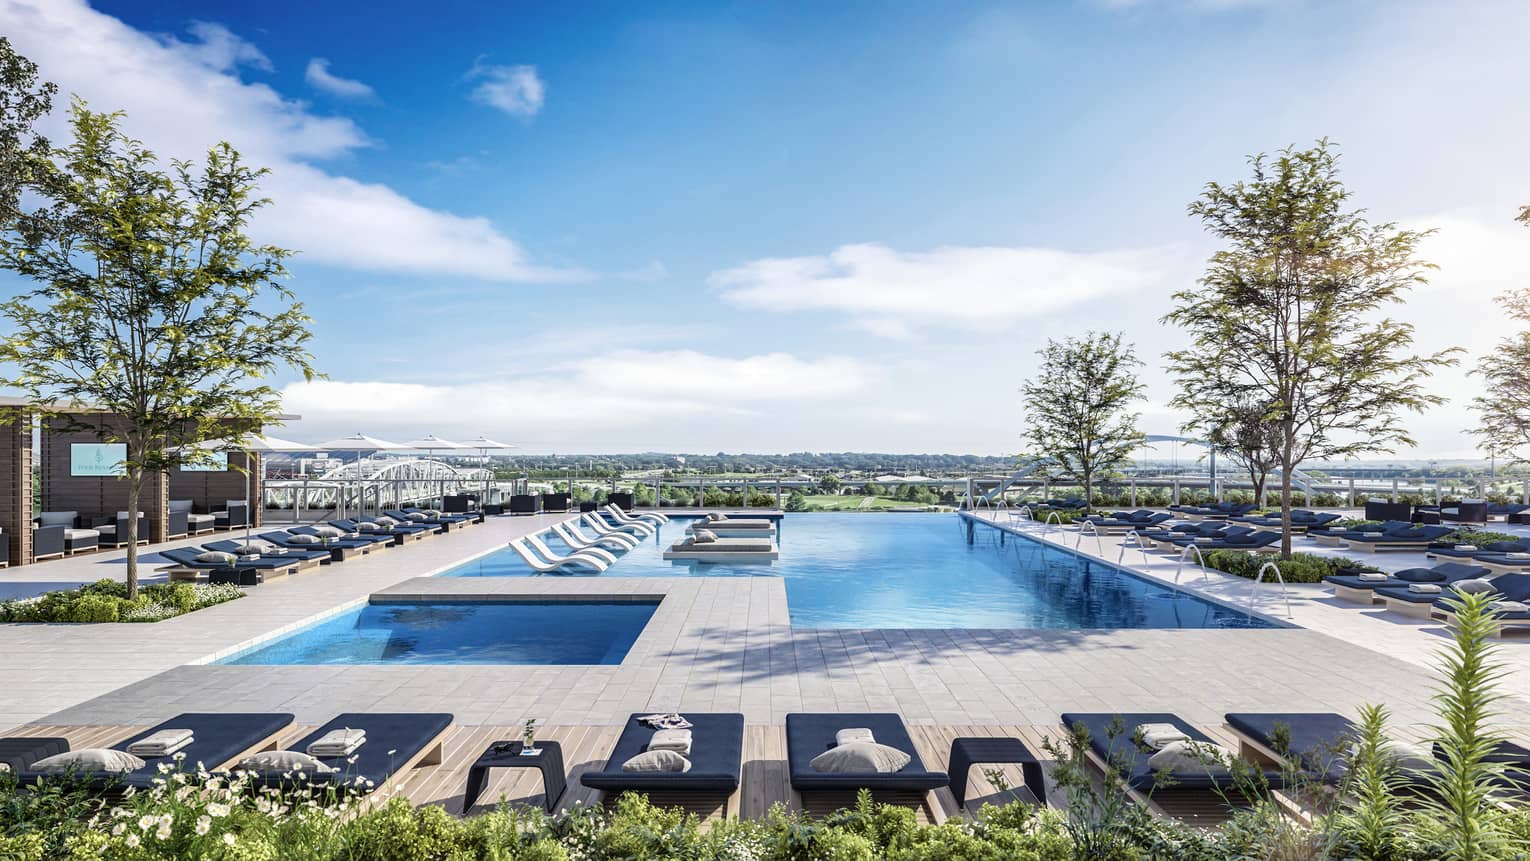 Rendering of outdoor pool with black lounge chairs, pillows, city view